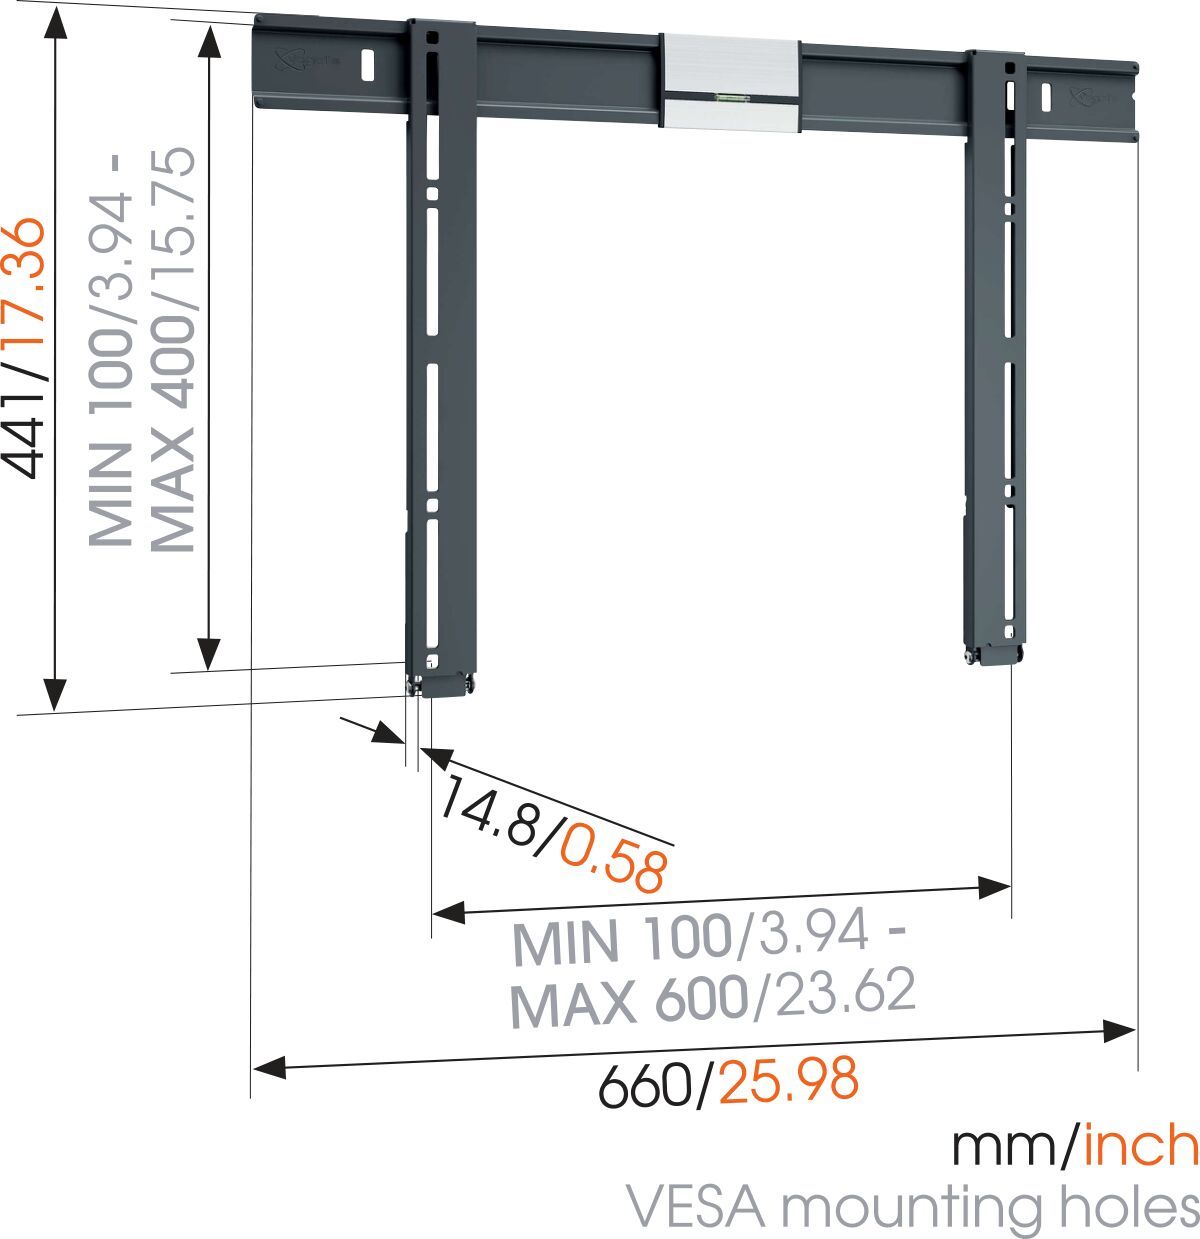 Vogel's THIN 505 ExtraThin Fixed TV Wall Mount - Suitable for 40 up to 65 inch TVs up to Dimensions